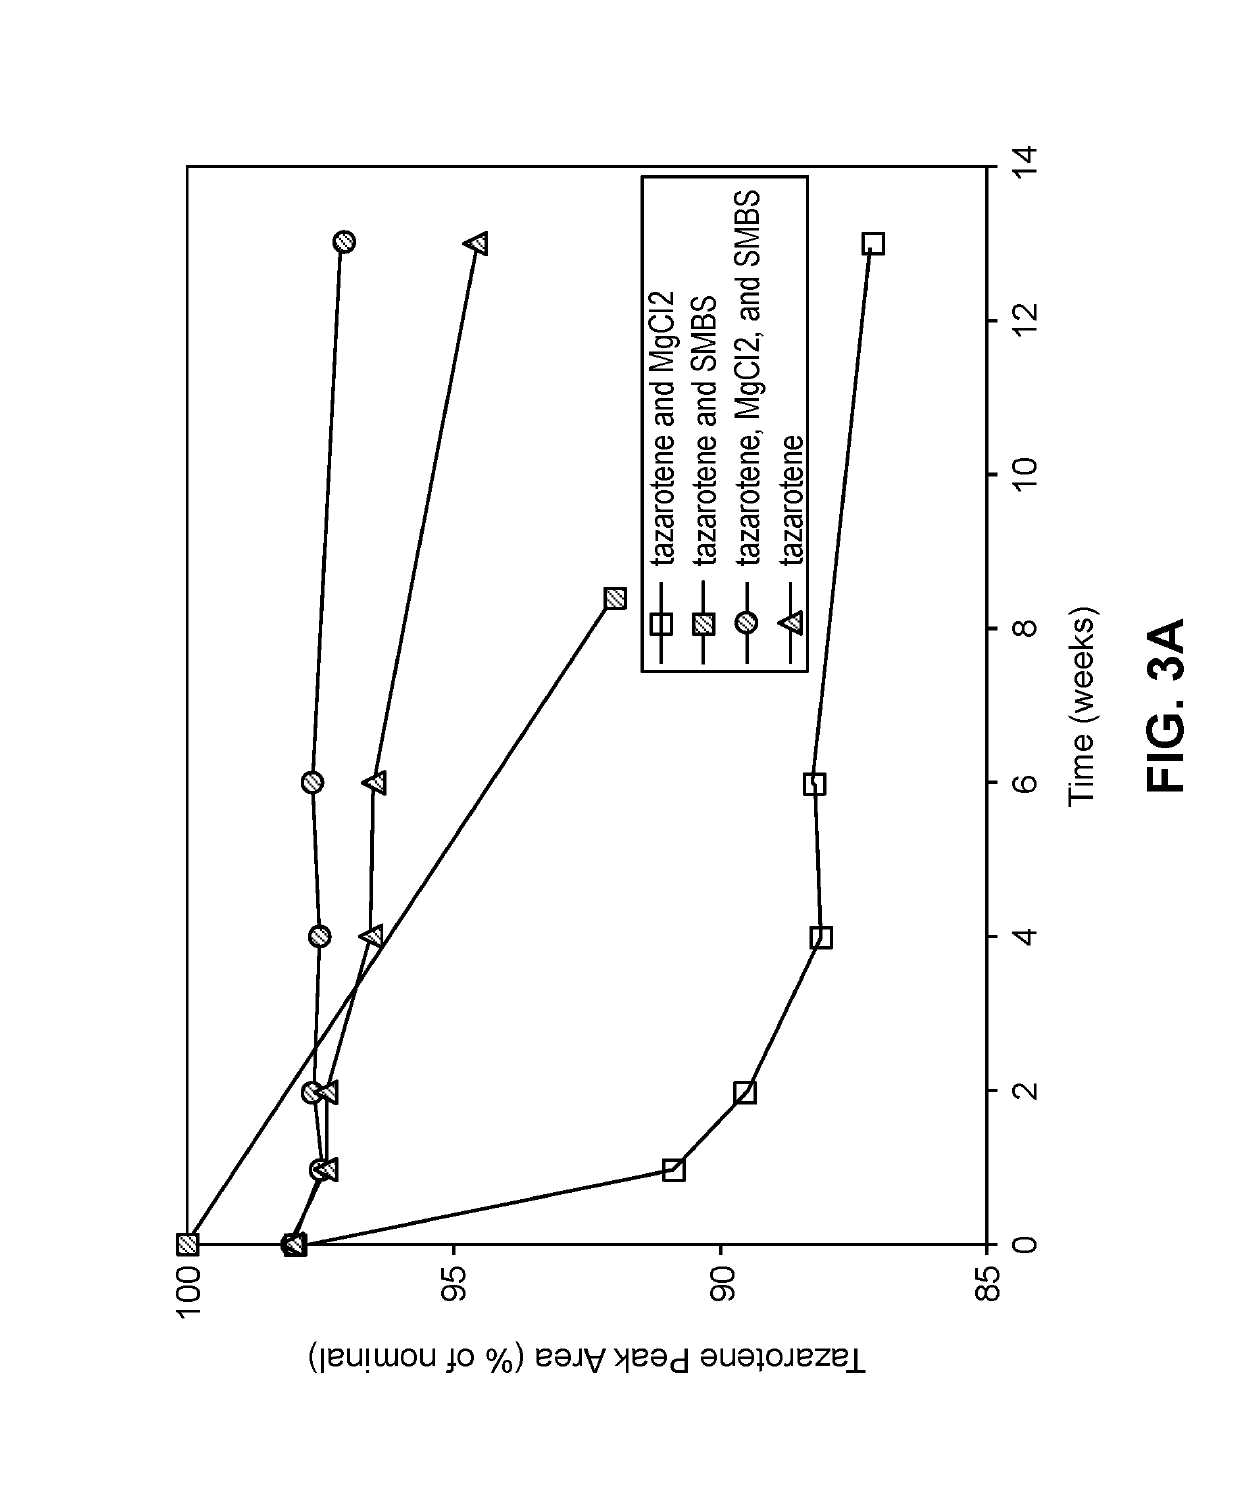 Topical compositions with stable solubilized selective retinoids and/or tetracycline-class antibiotics